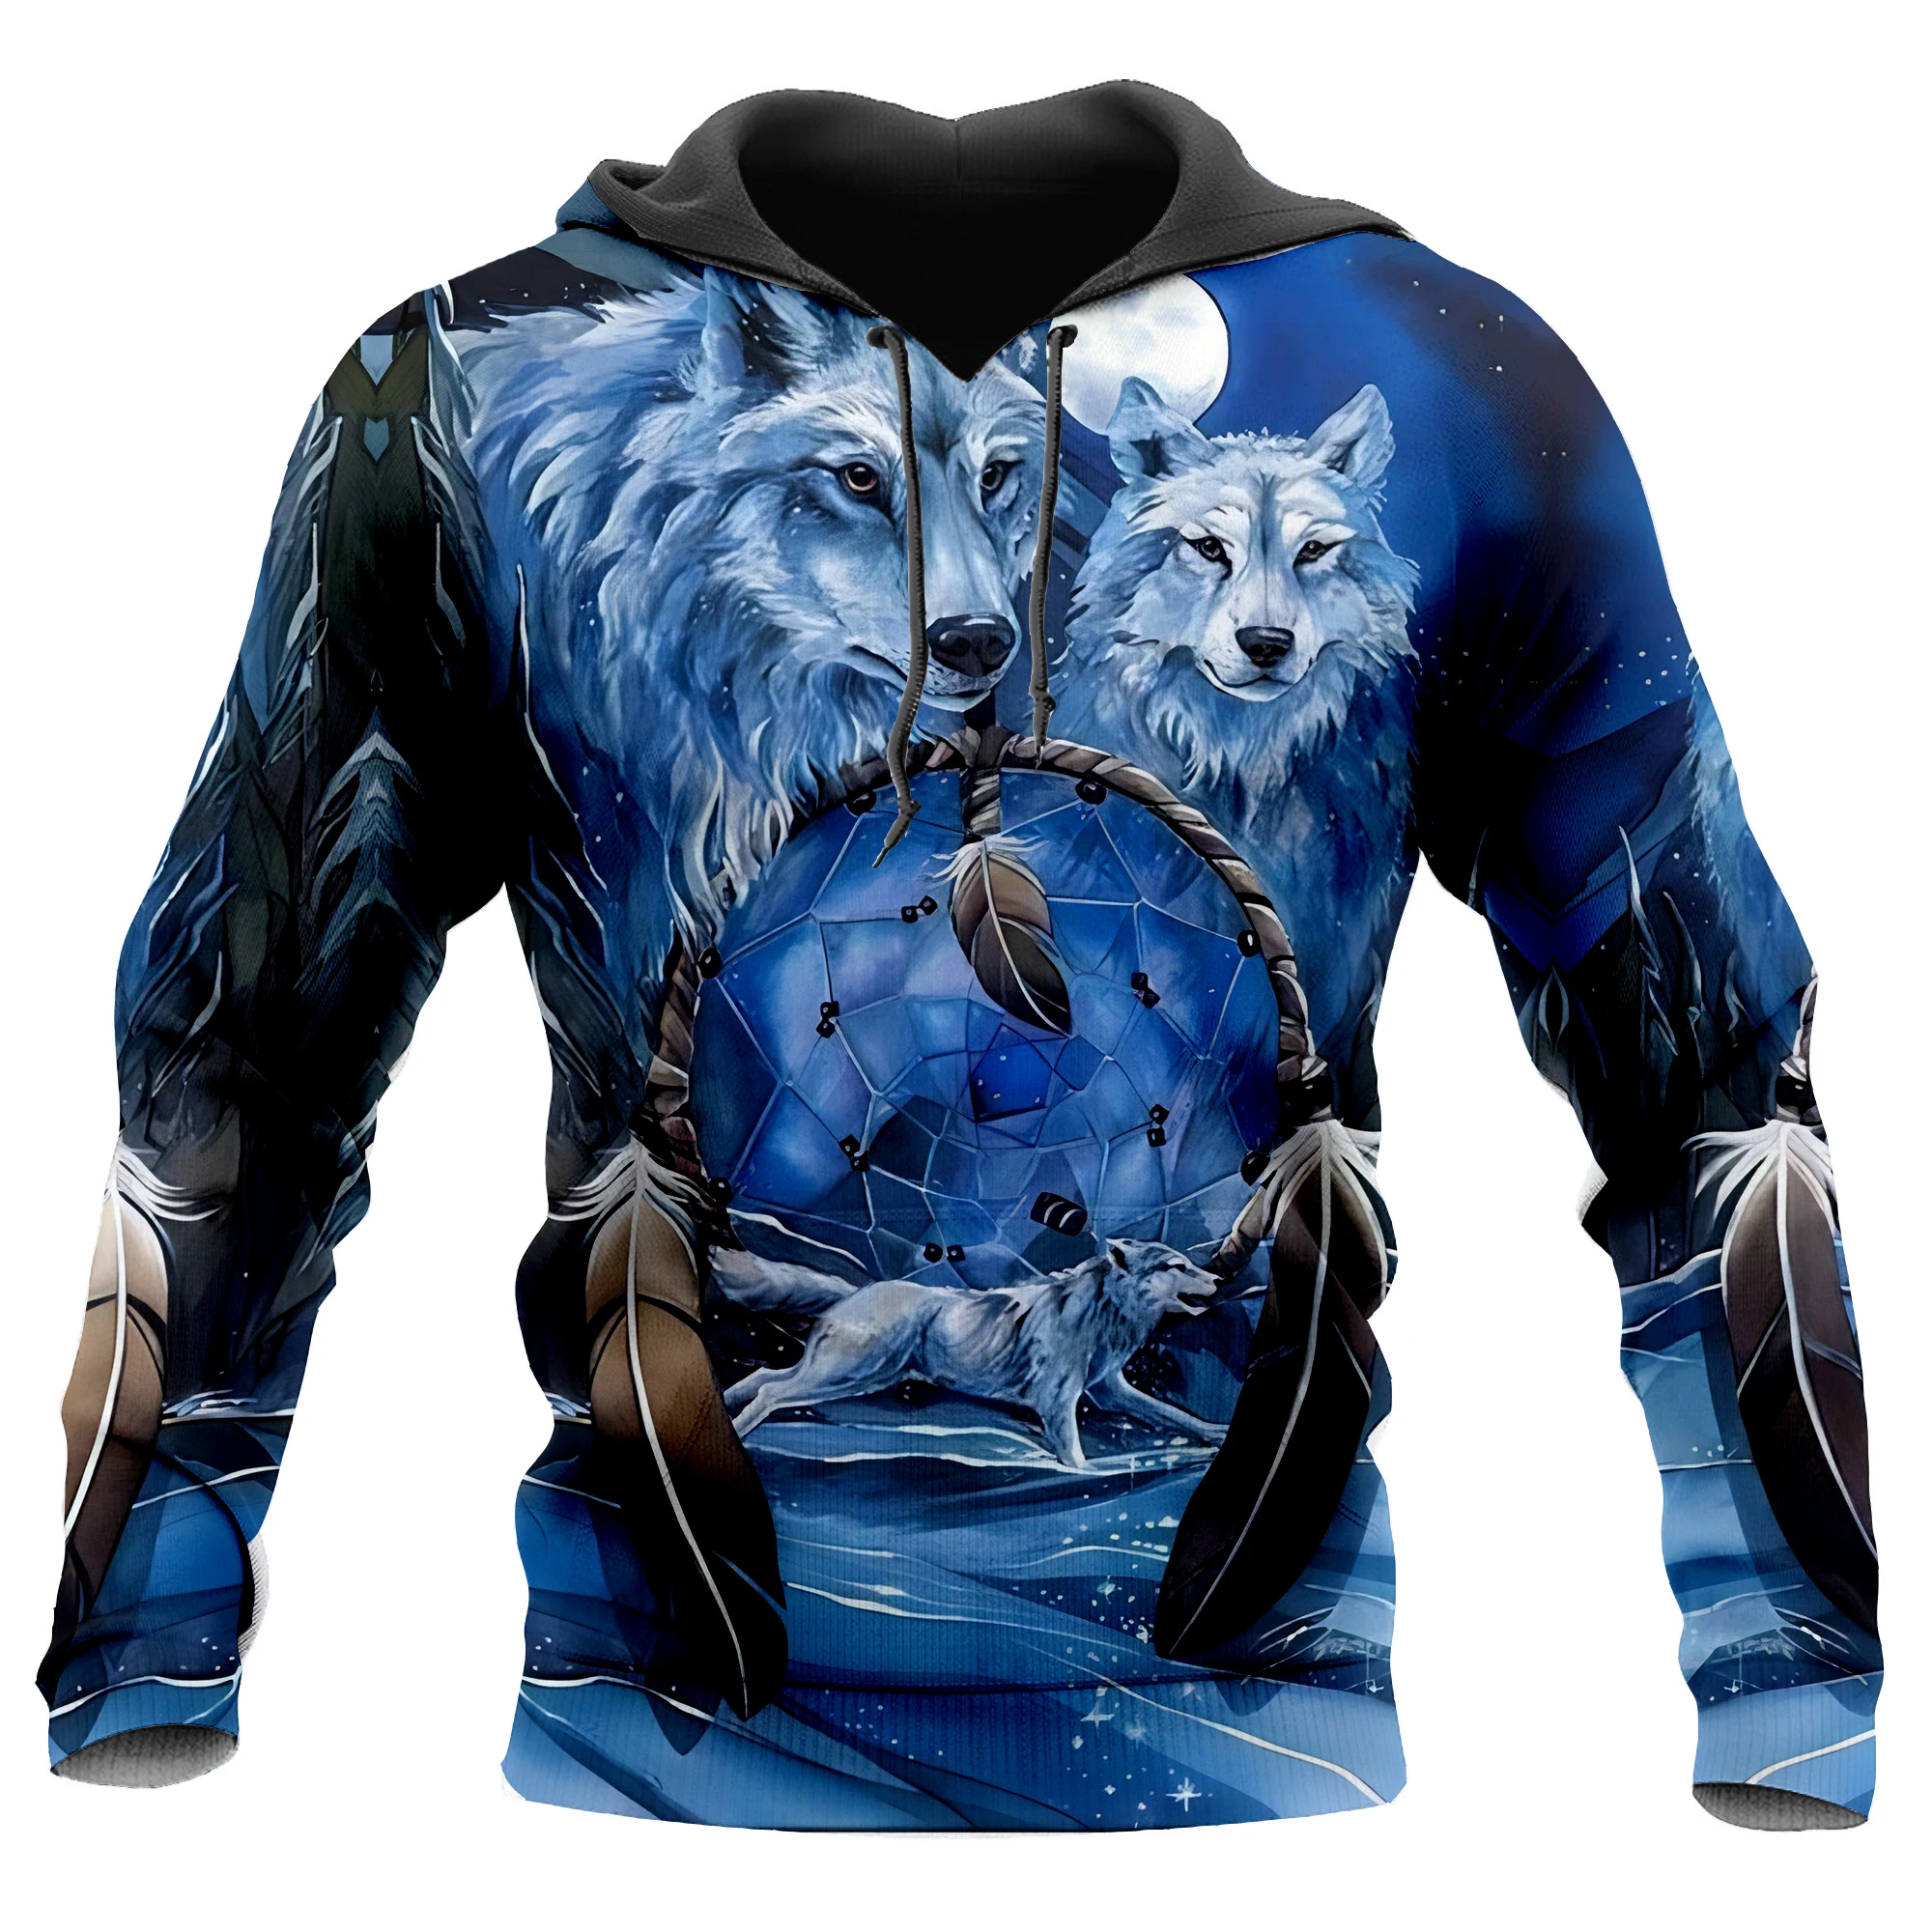 

Native Wolf Dream Catcher - Two Wolves 3D Print Hoodie Man Female Pullover Sweatshirt Hooded Jacket Jersey Coat Tracksuits-2